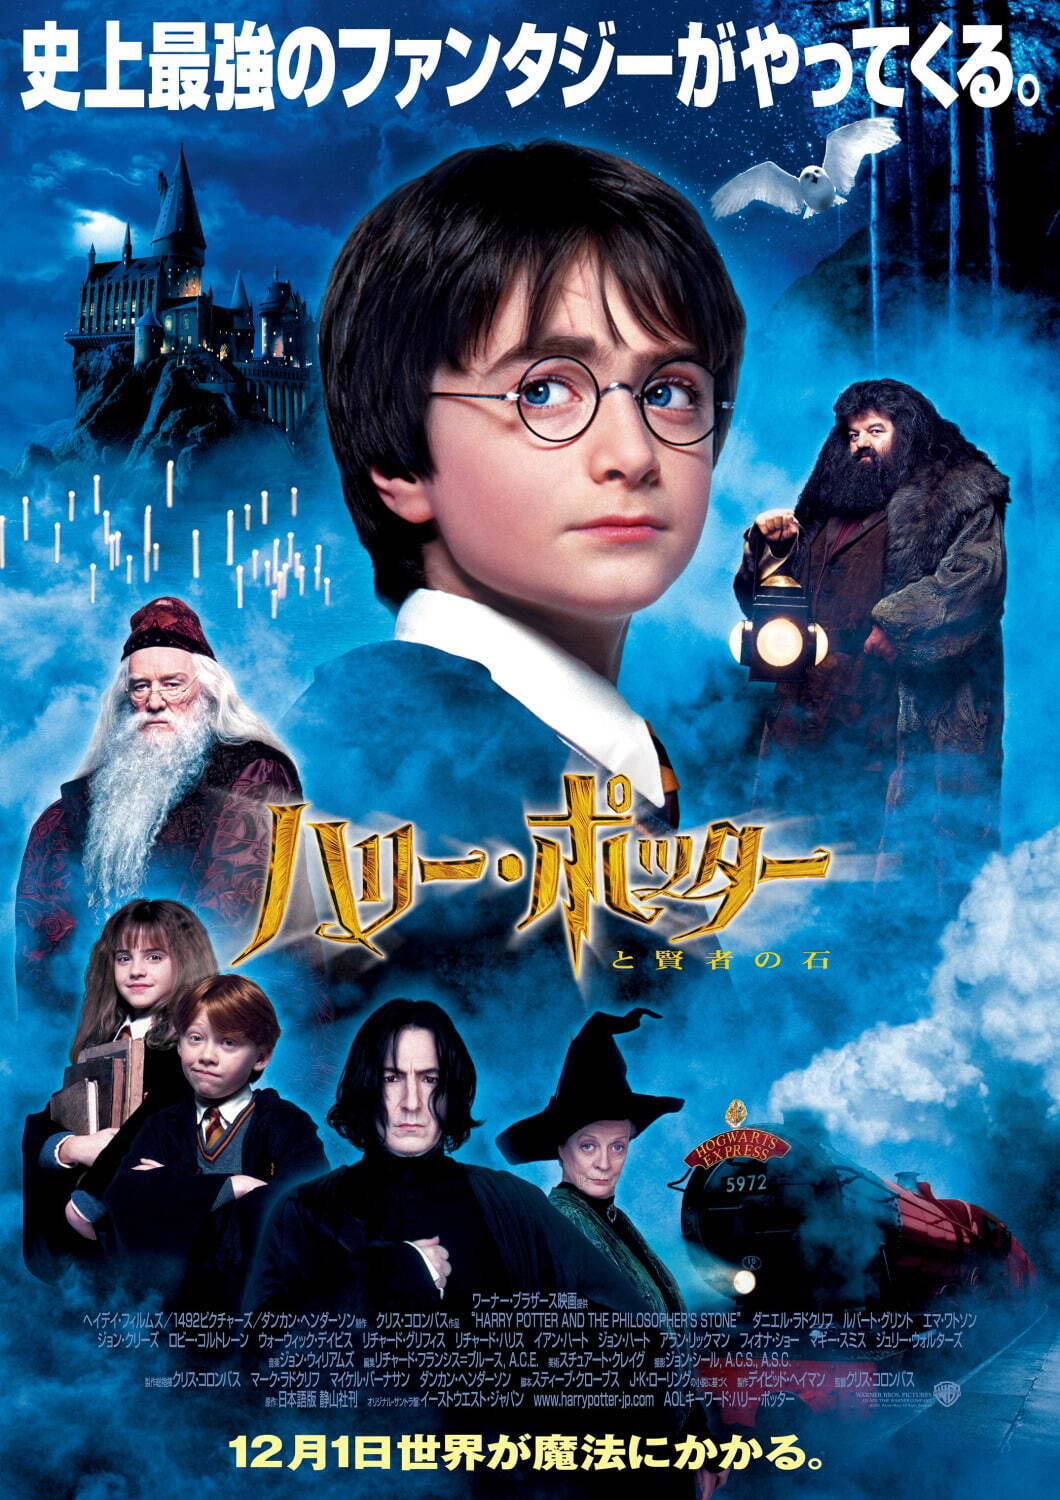 Harry Potter characters, names and related indicia are trademarks
of and © Warner Bros. Entertainment Inc.
Harry Potter Publishing Rights © J.K.R.© 2022 Warner Bros.
Entertainment Inc. All rights reserved.